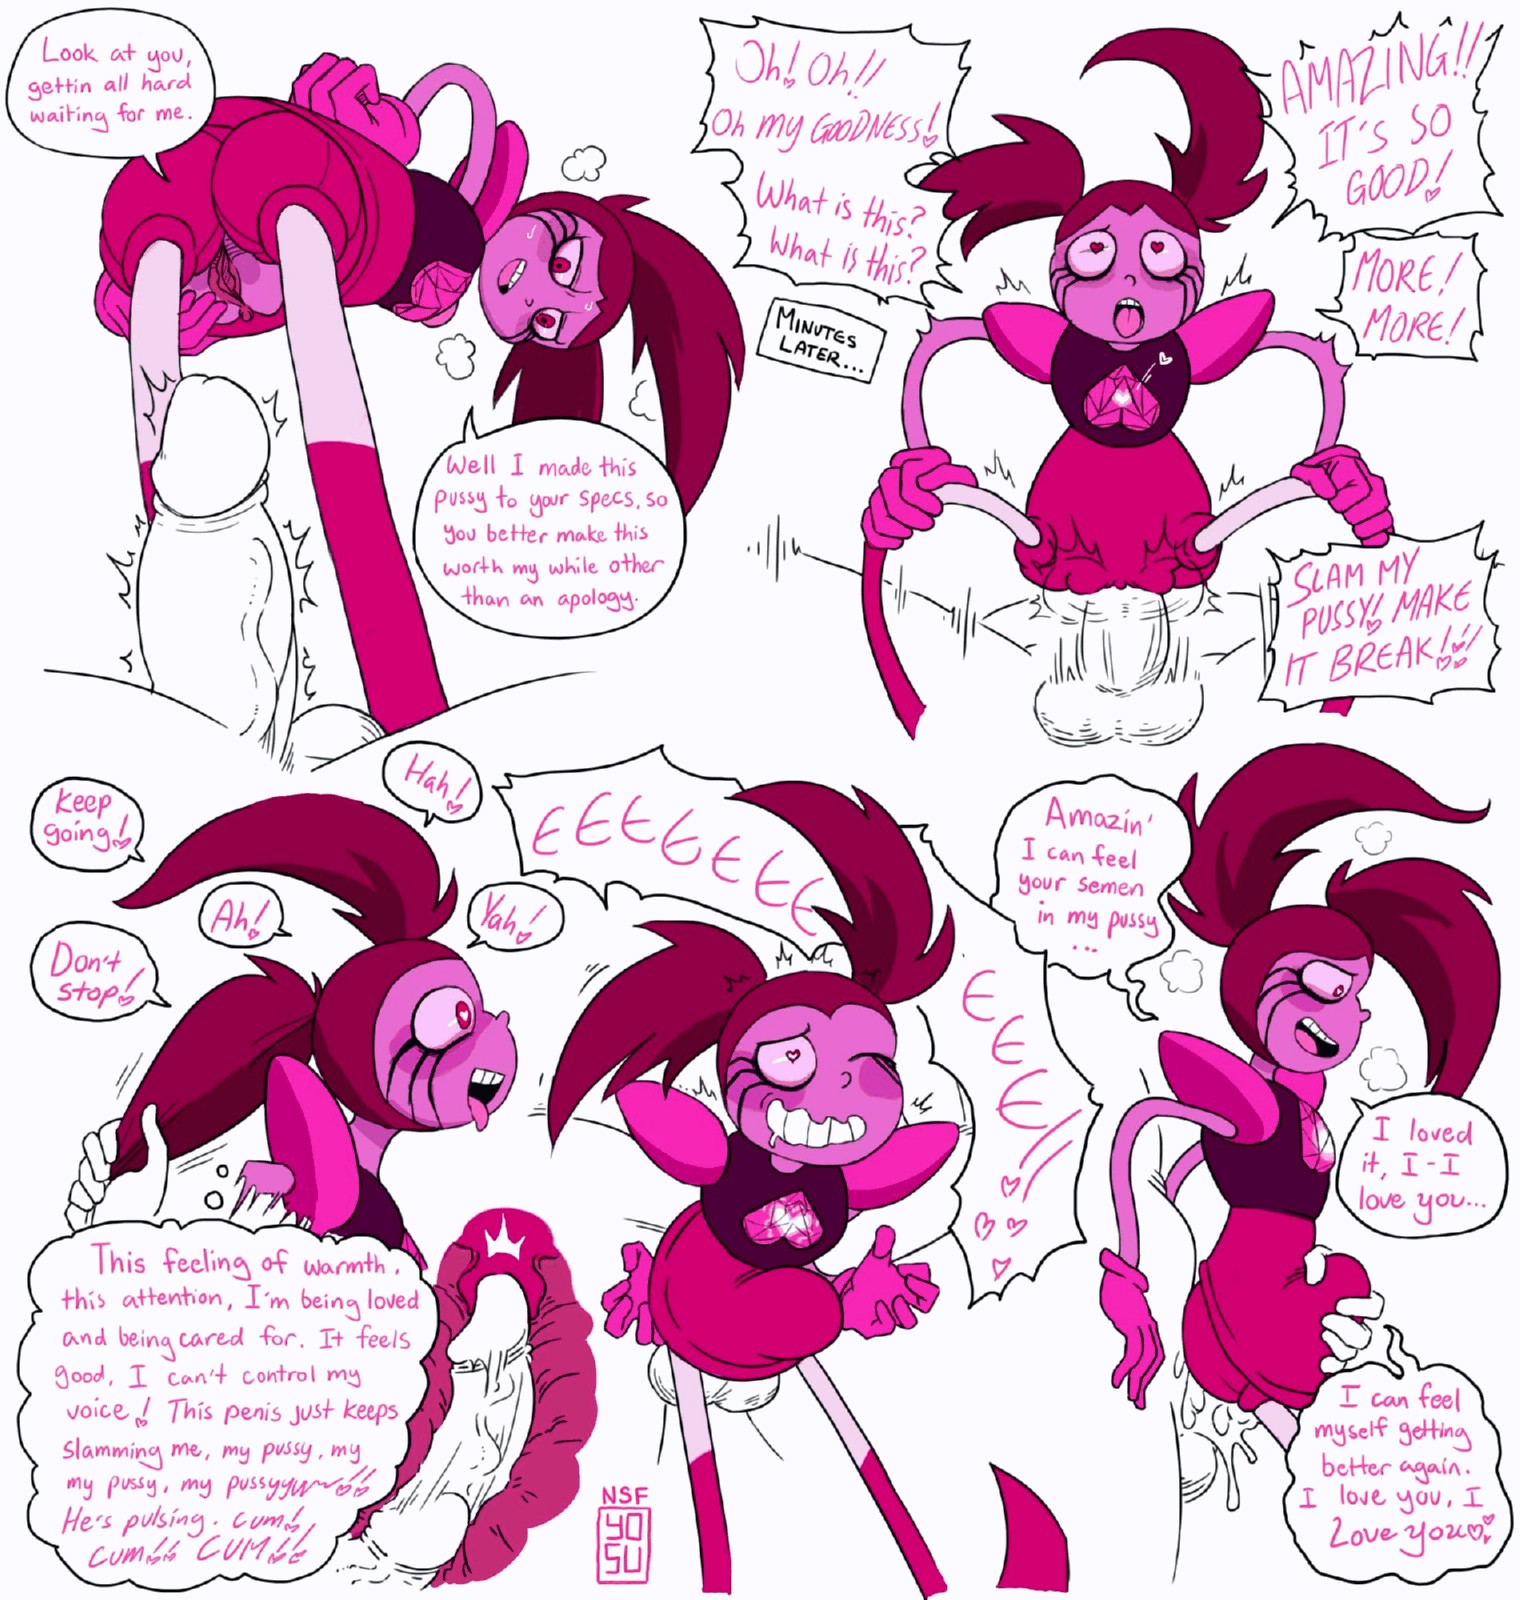 spinel's apology porn comic page 002